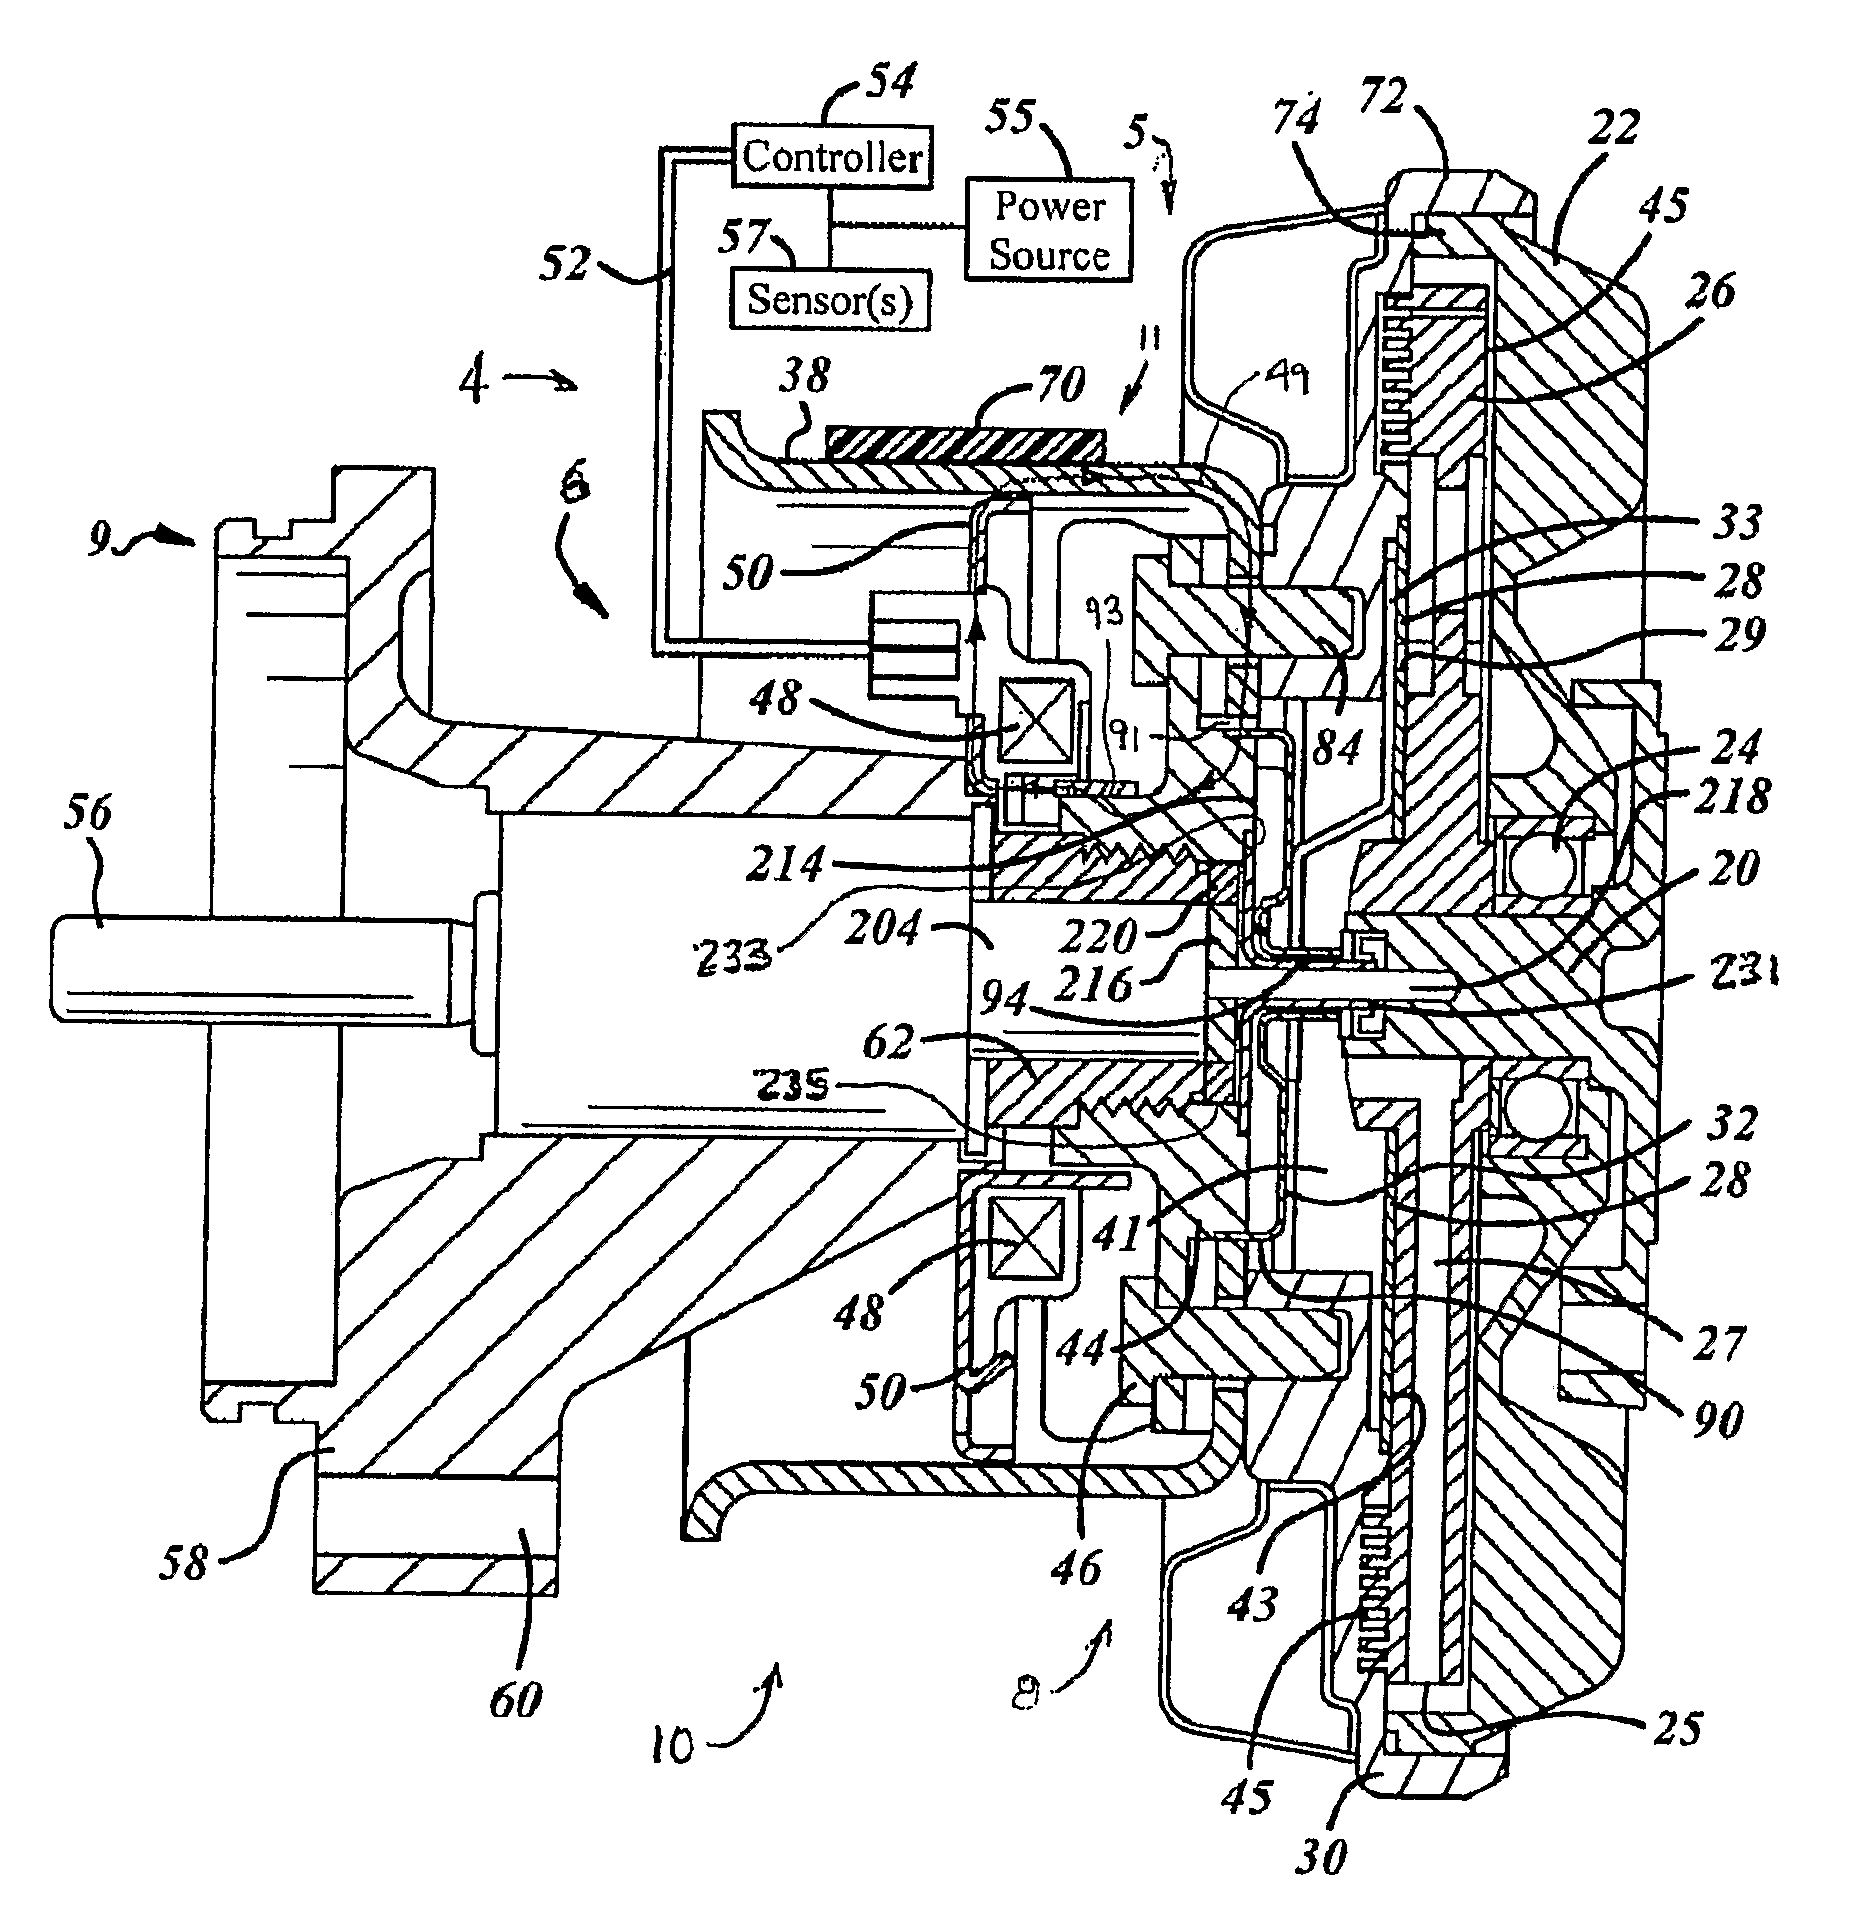 Electromagnetic differential speed control system for a fluid coupling device